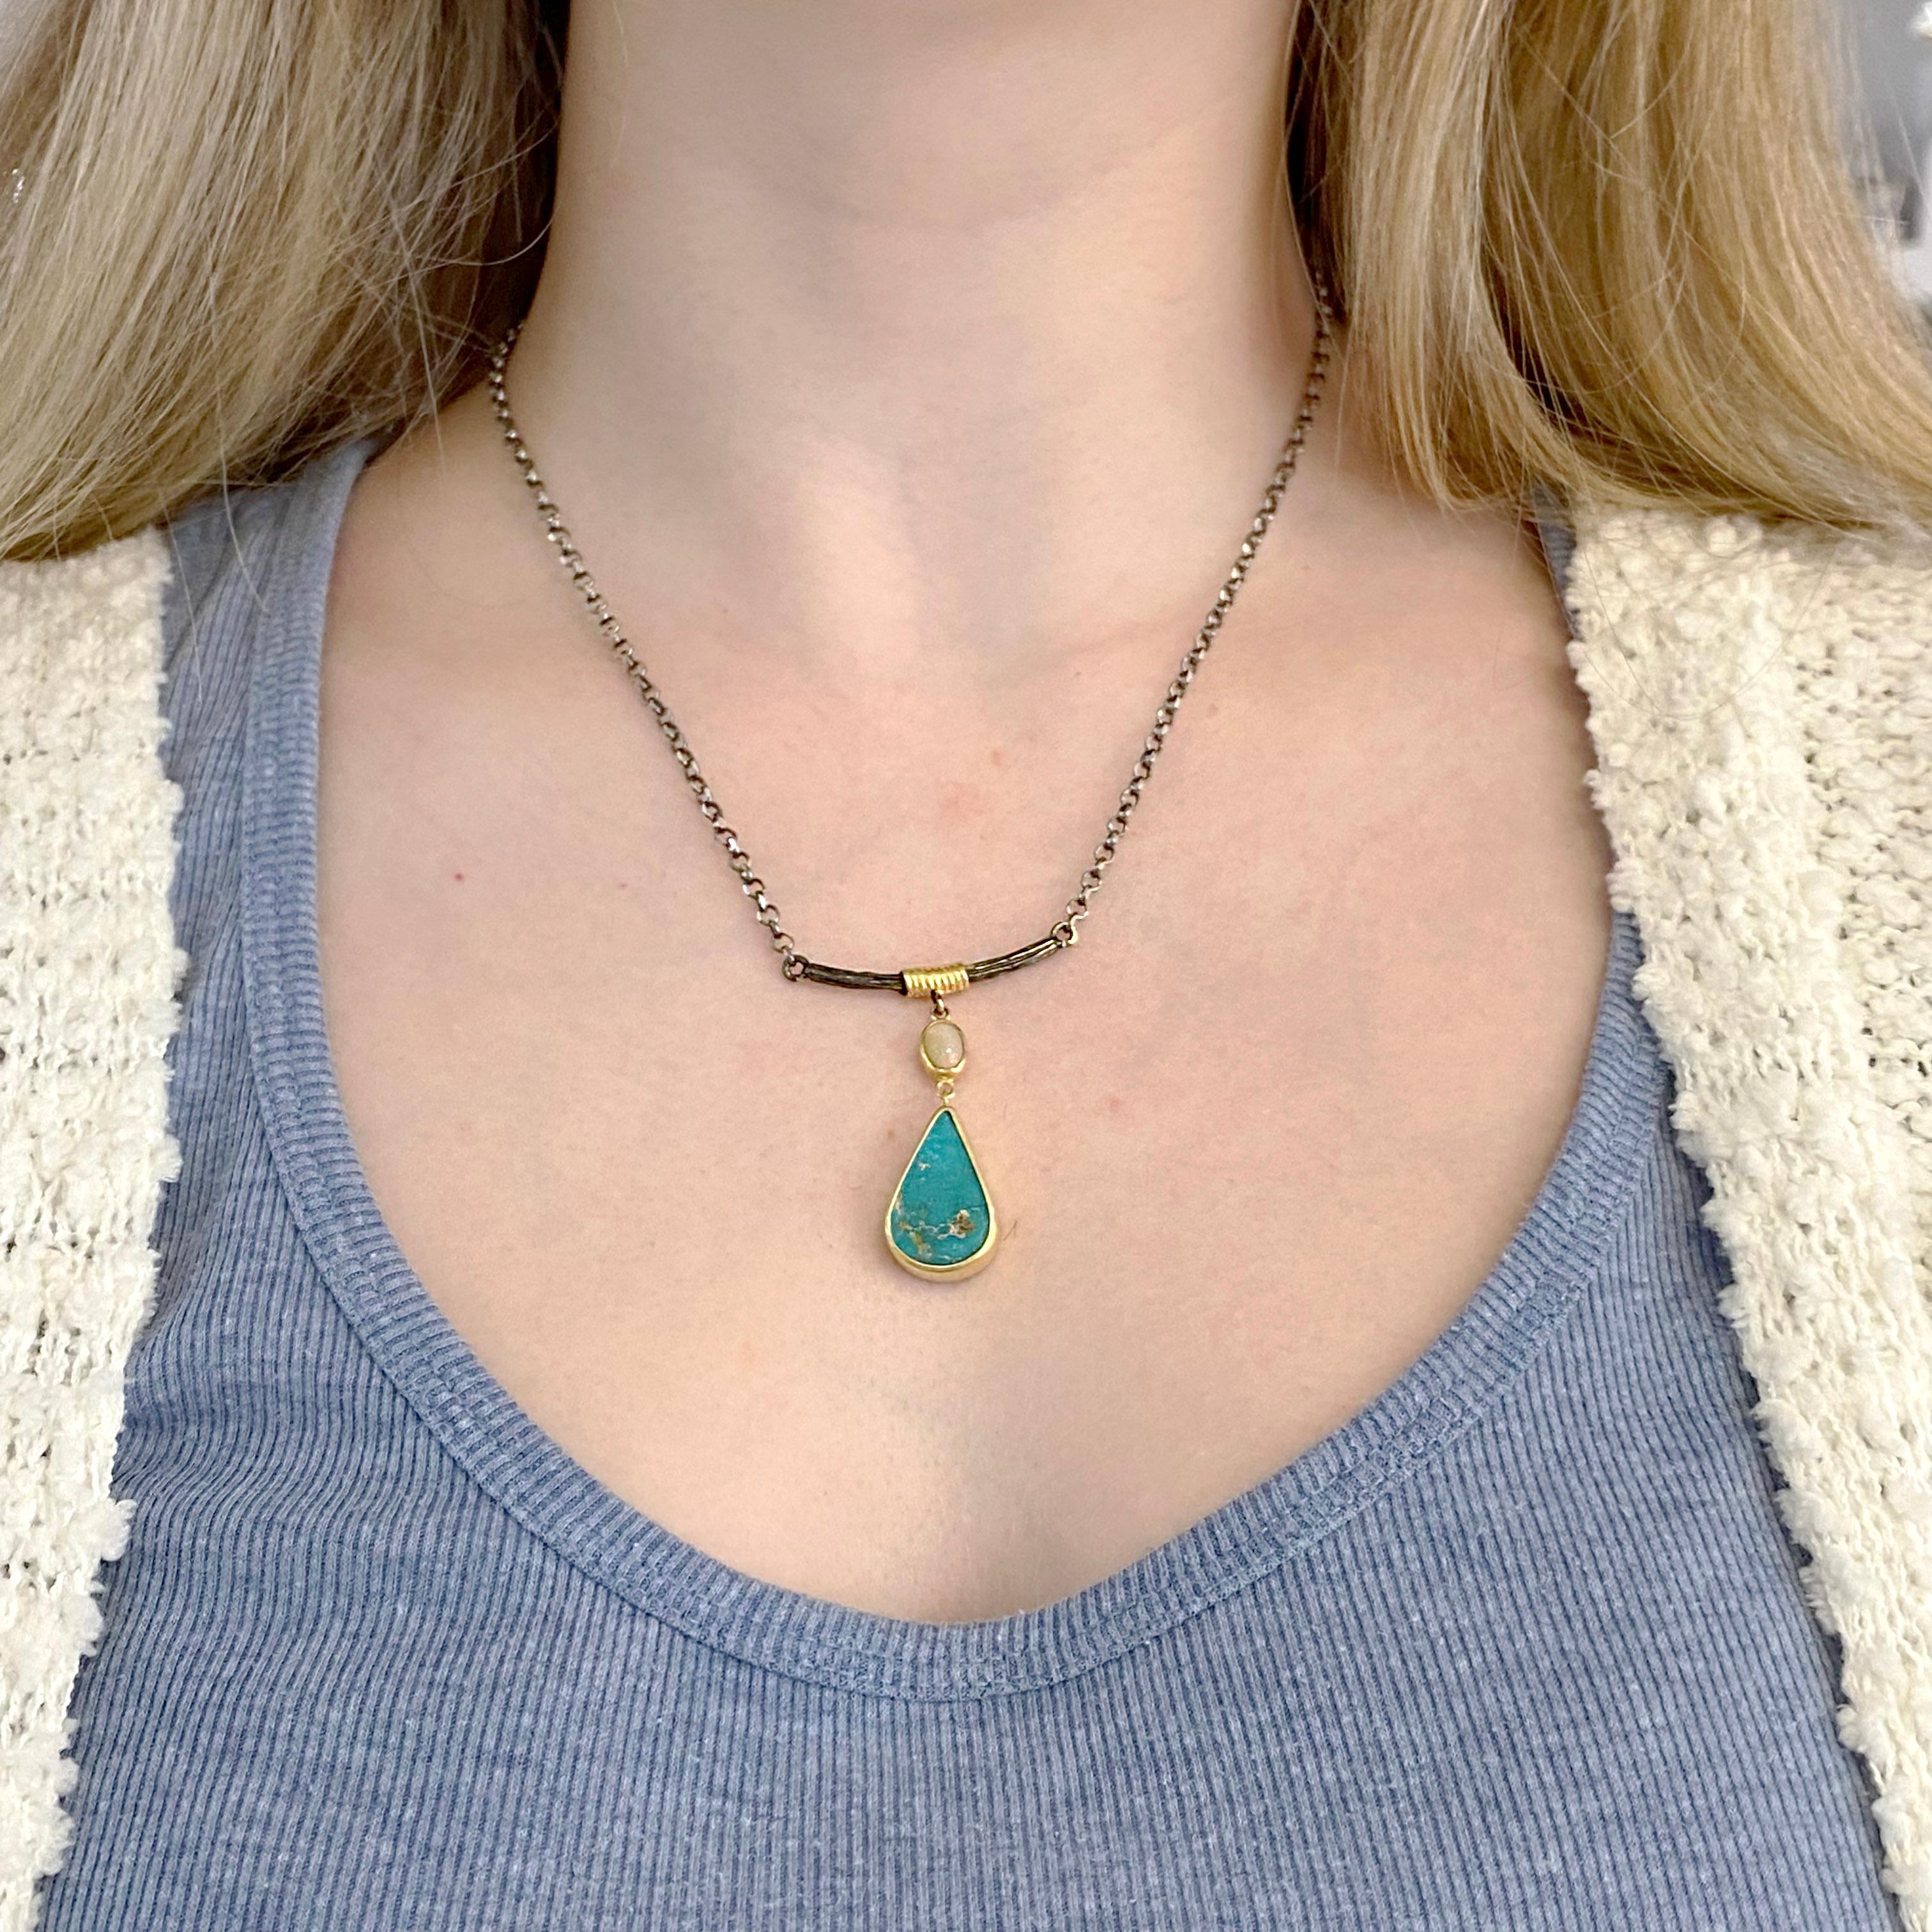 This hand forged pendant is gorgeous with a bezel set opal and turquoise. The opal’s origin is Australia and the turquoise is from New Mexico.  There is a bezel around each gemstone and a very organic design that uses wrapped gold.  The chain is a